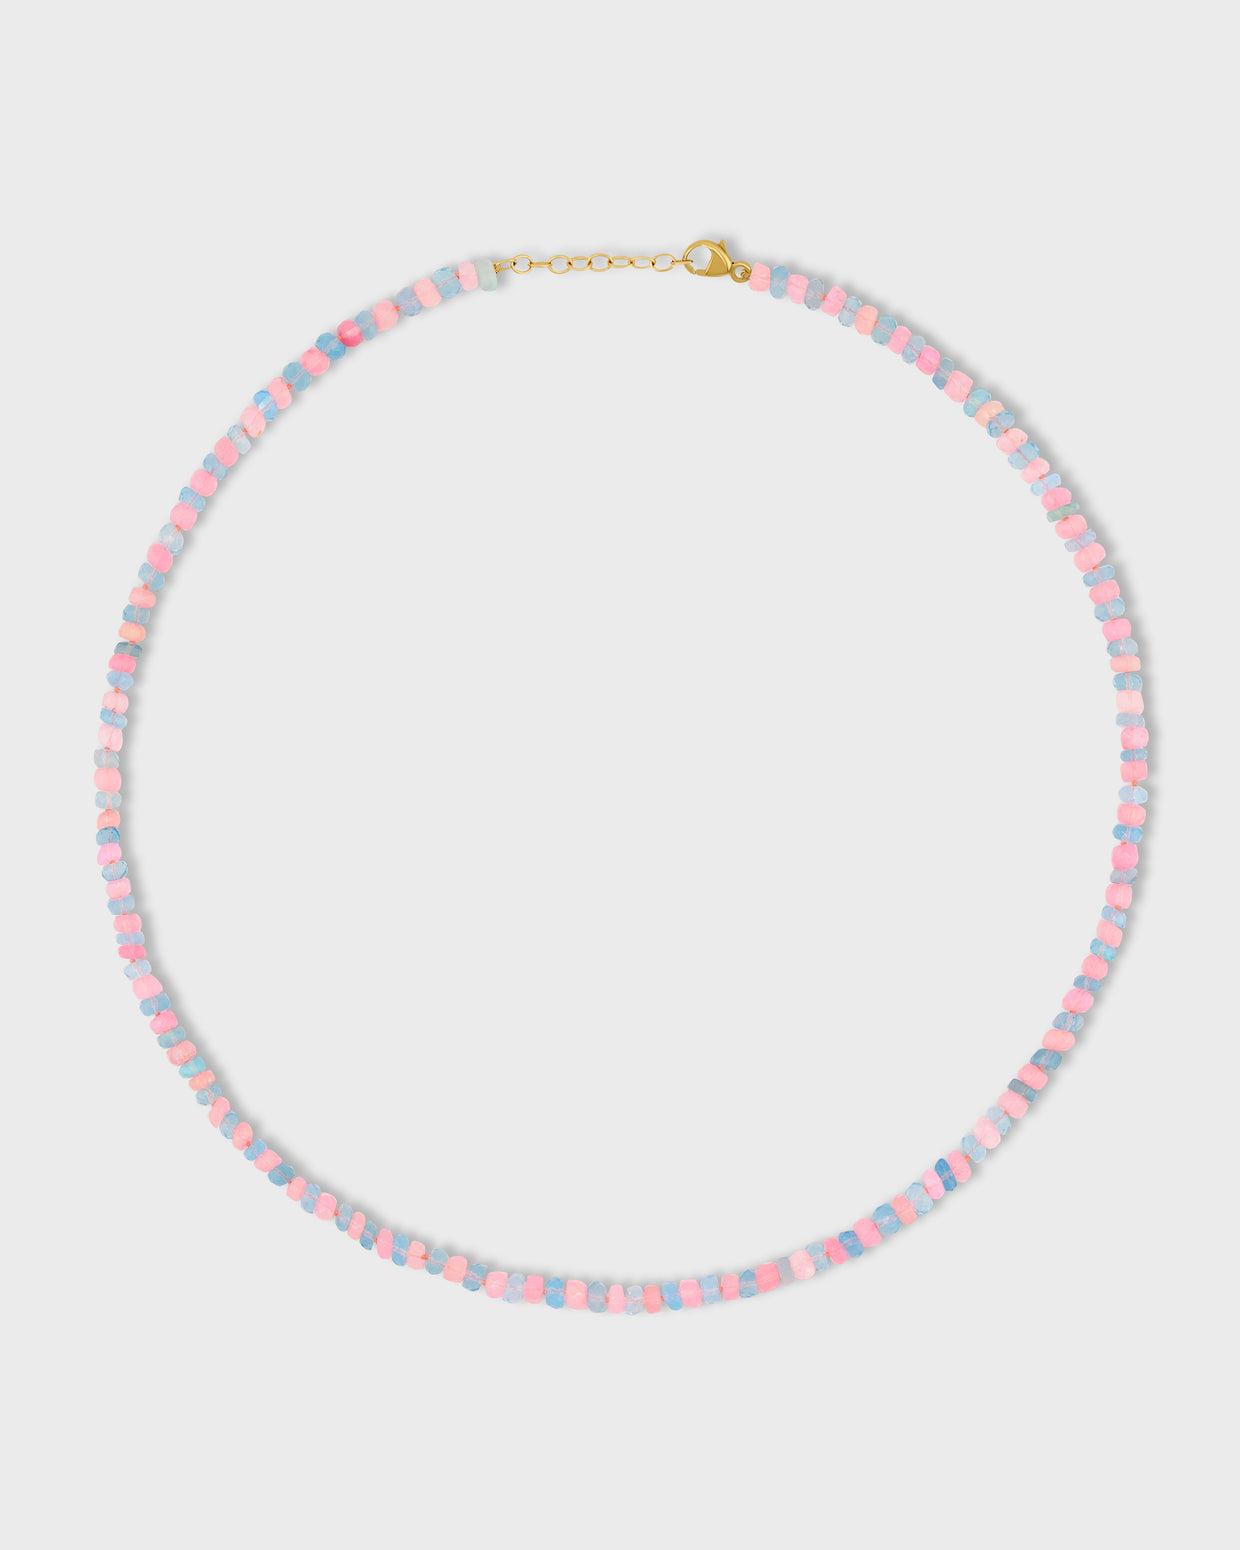 Soleil Pink Blue Faceted Opal Connection Necklace